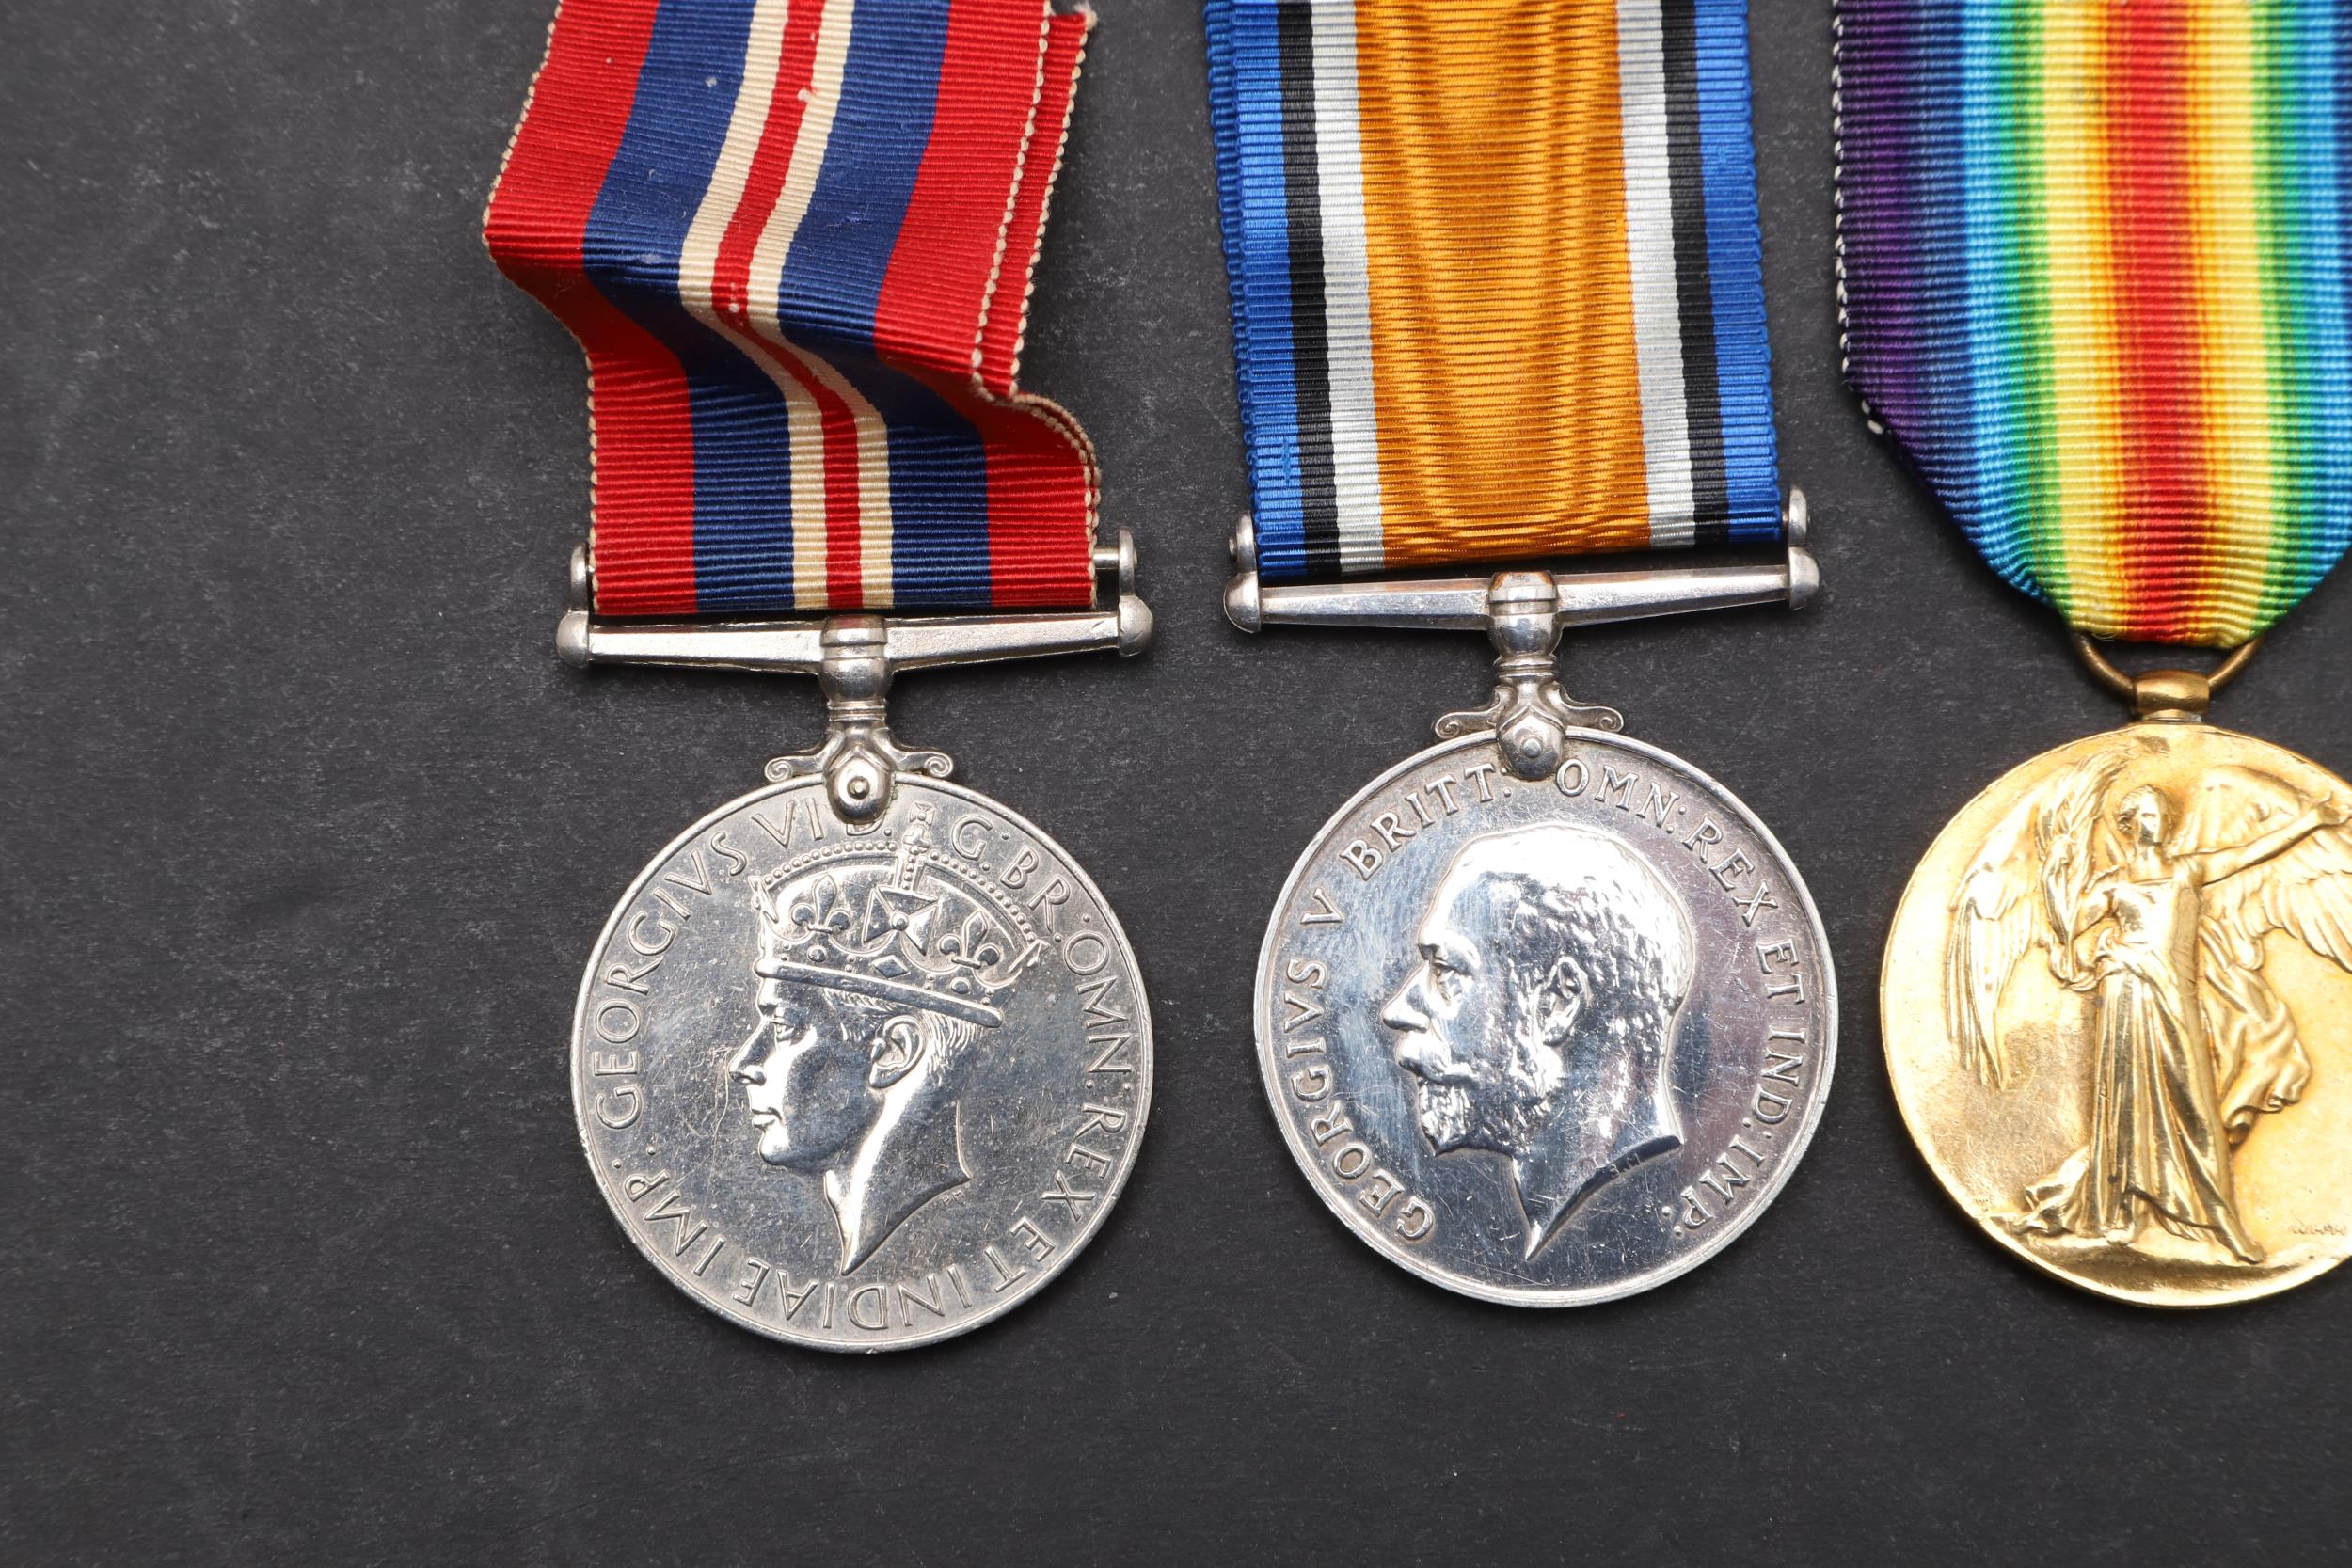 A FIRST WORLD WAR SILVER WAR BADGE AND A SMALL COLLECTION OF MEDALS. - Image 2 of 7